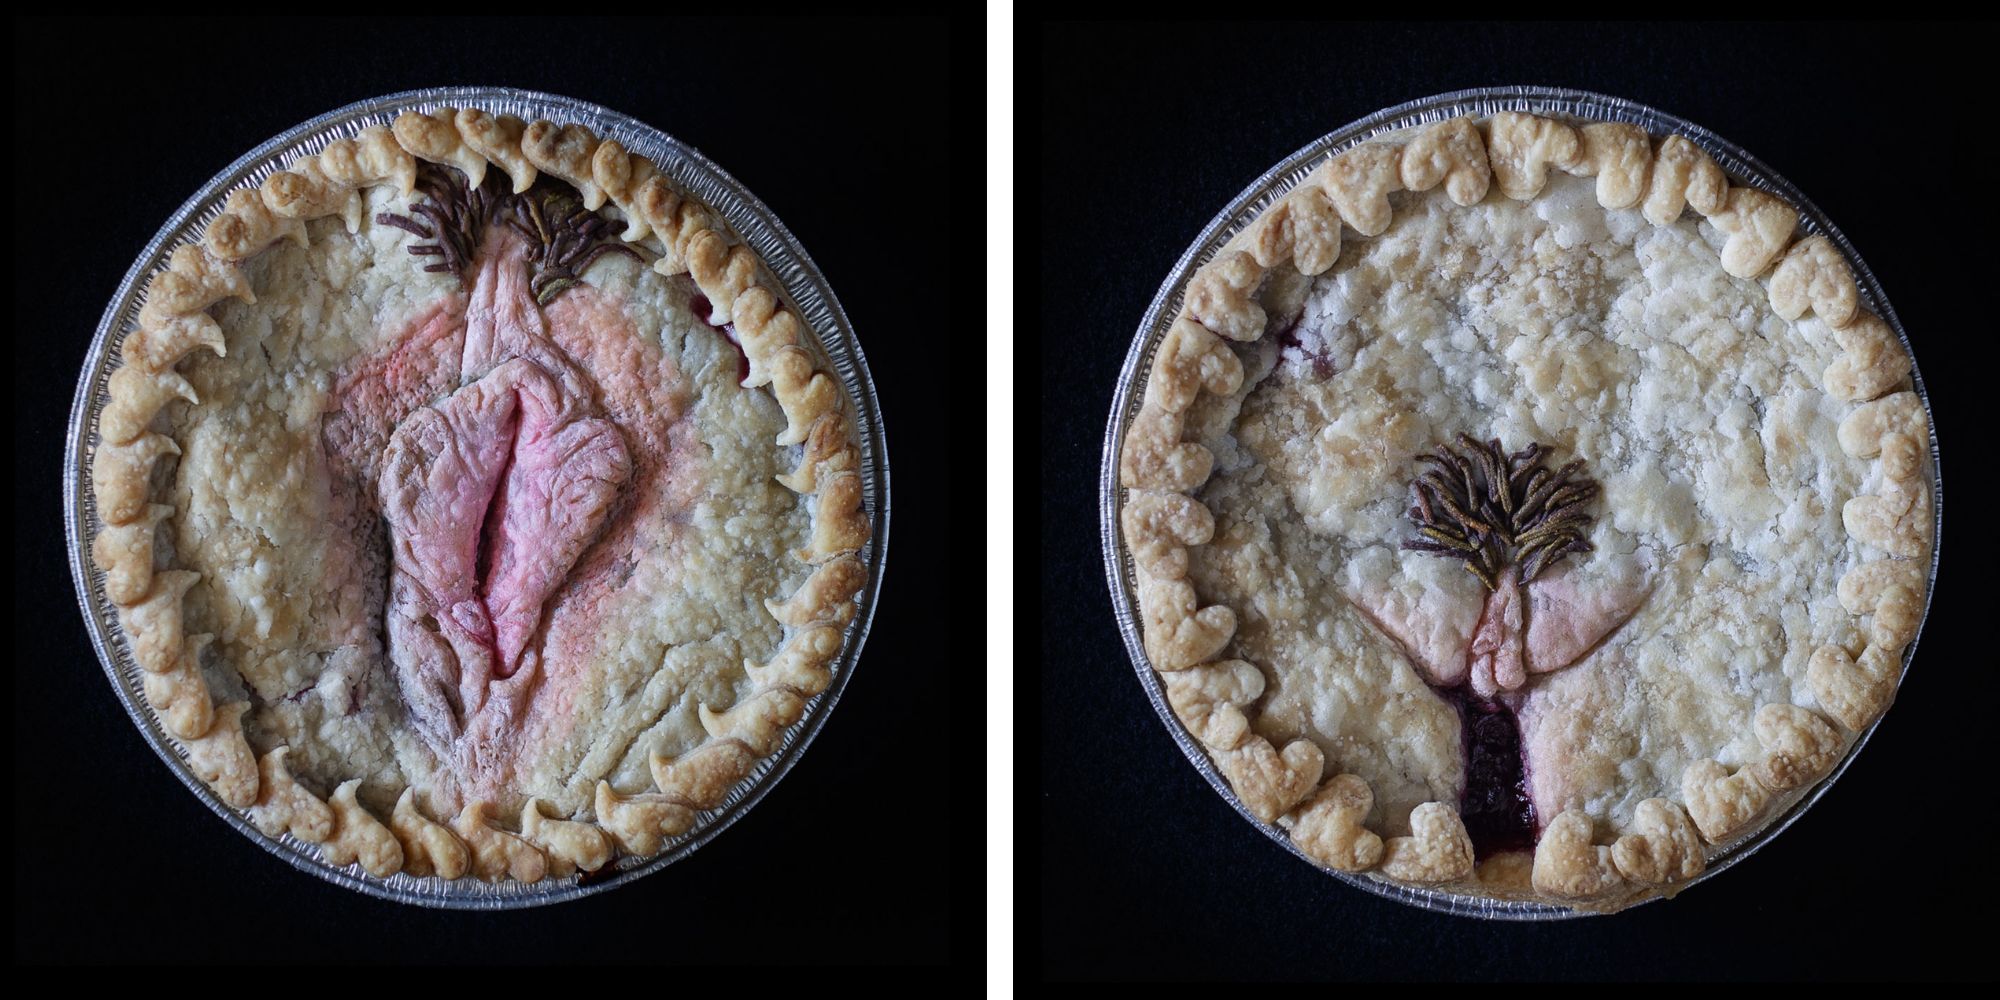 baked versions left side is the reclining view of a human vulva sculpted out of pie dough and the right side shows the frontal view of the same vulva also made into a pie